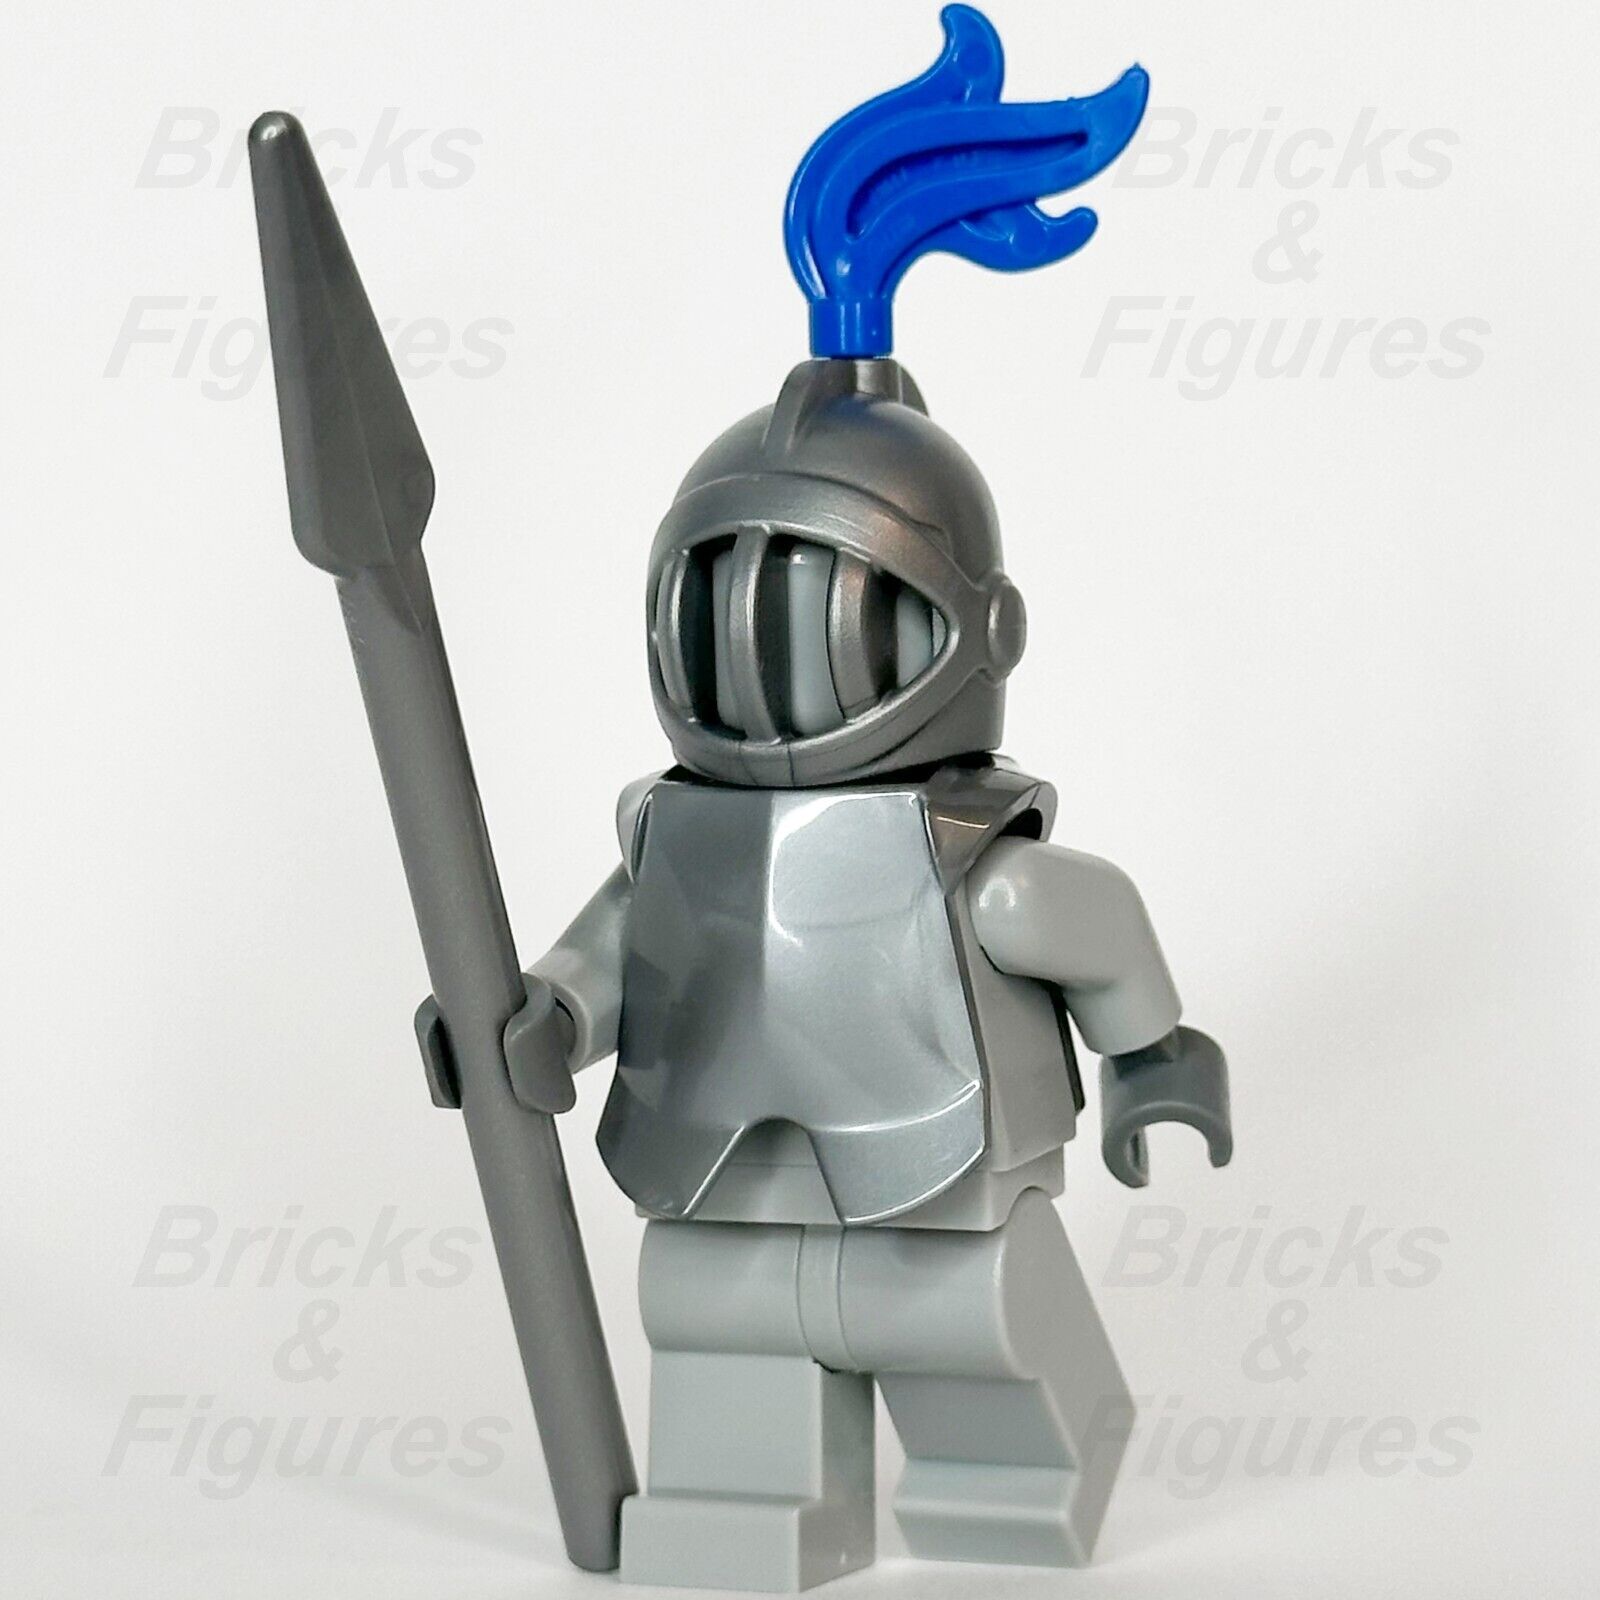 LEGO Disney Castle Knight Statue Minifigure with Spear Minifig 71040 dis023